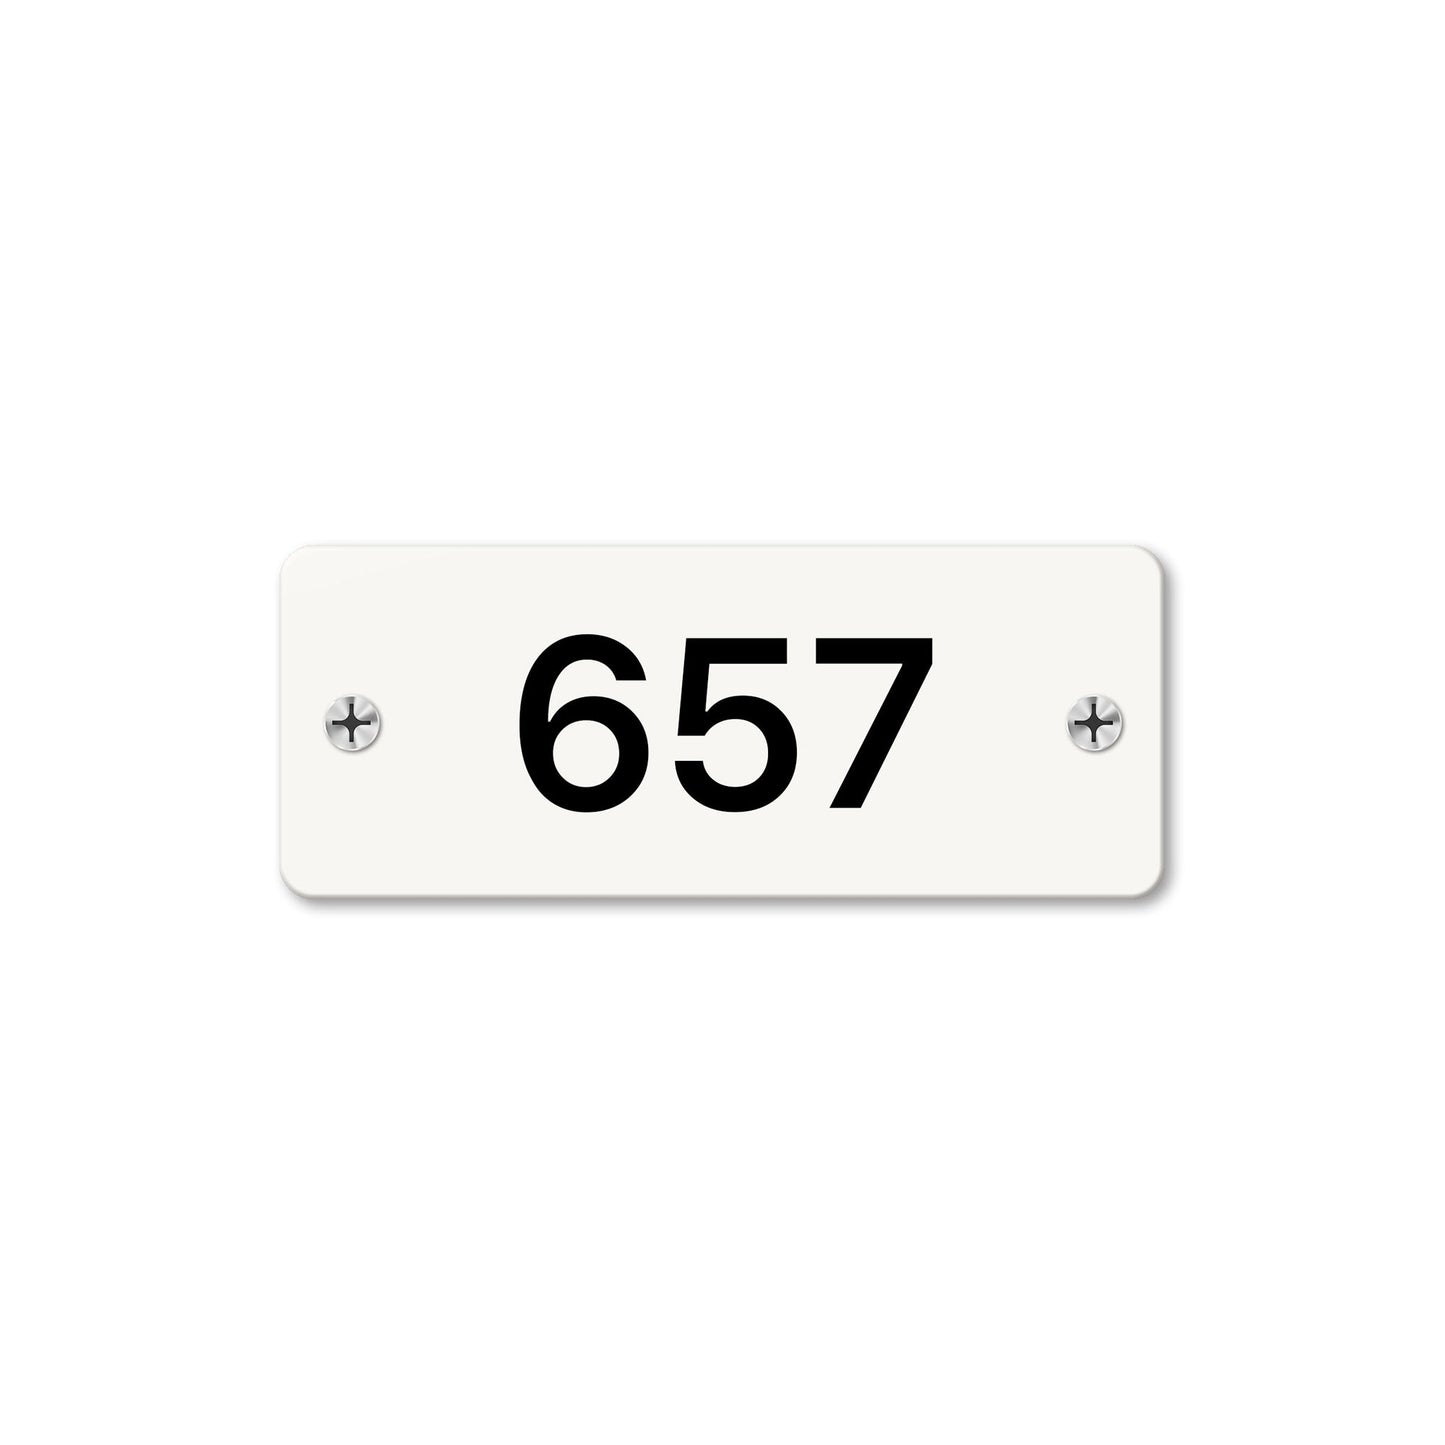 Numeral 657